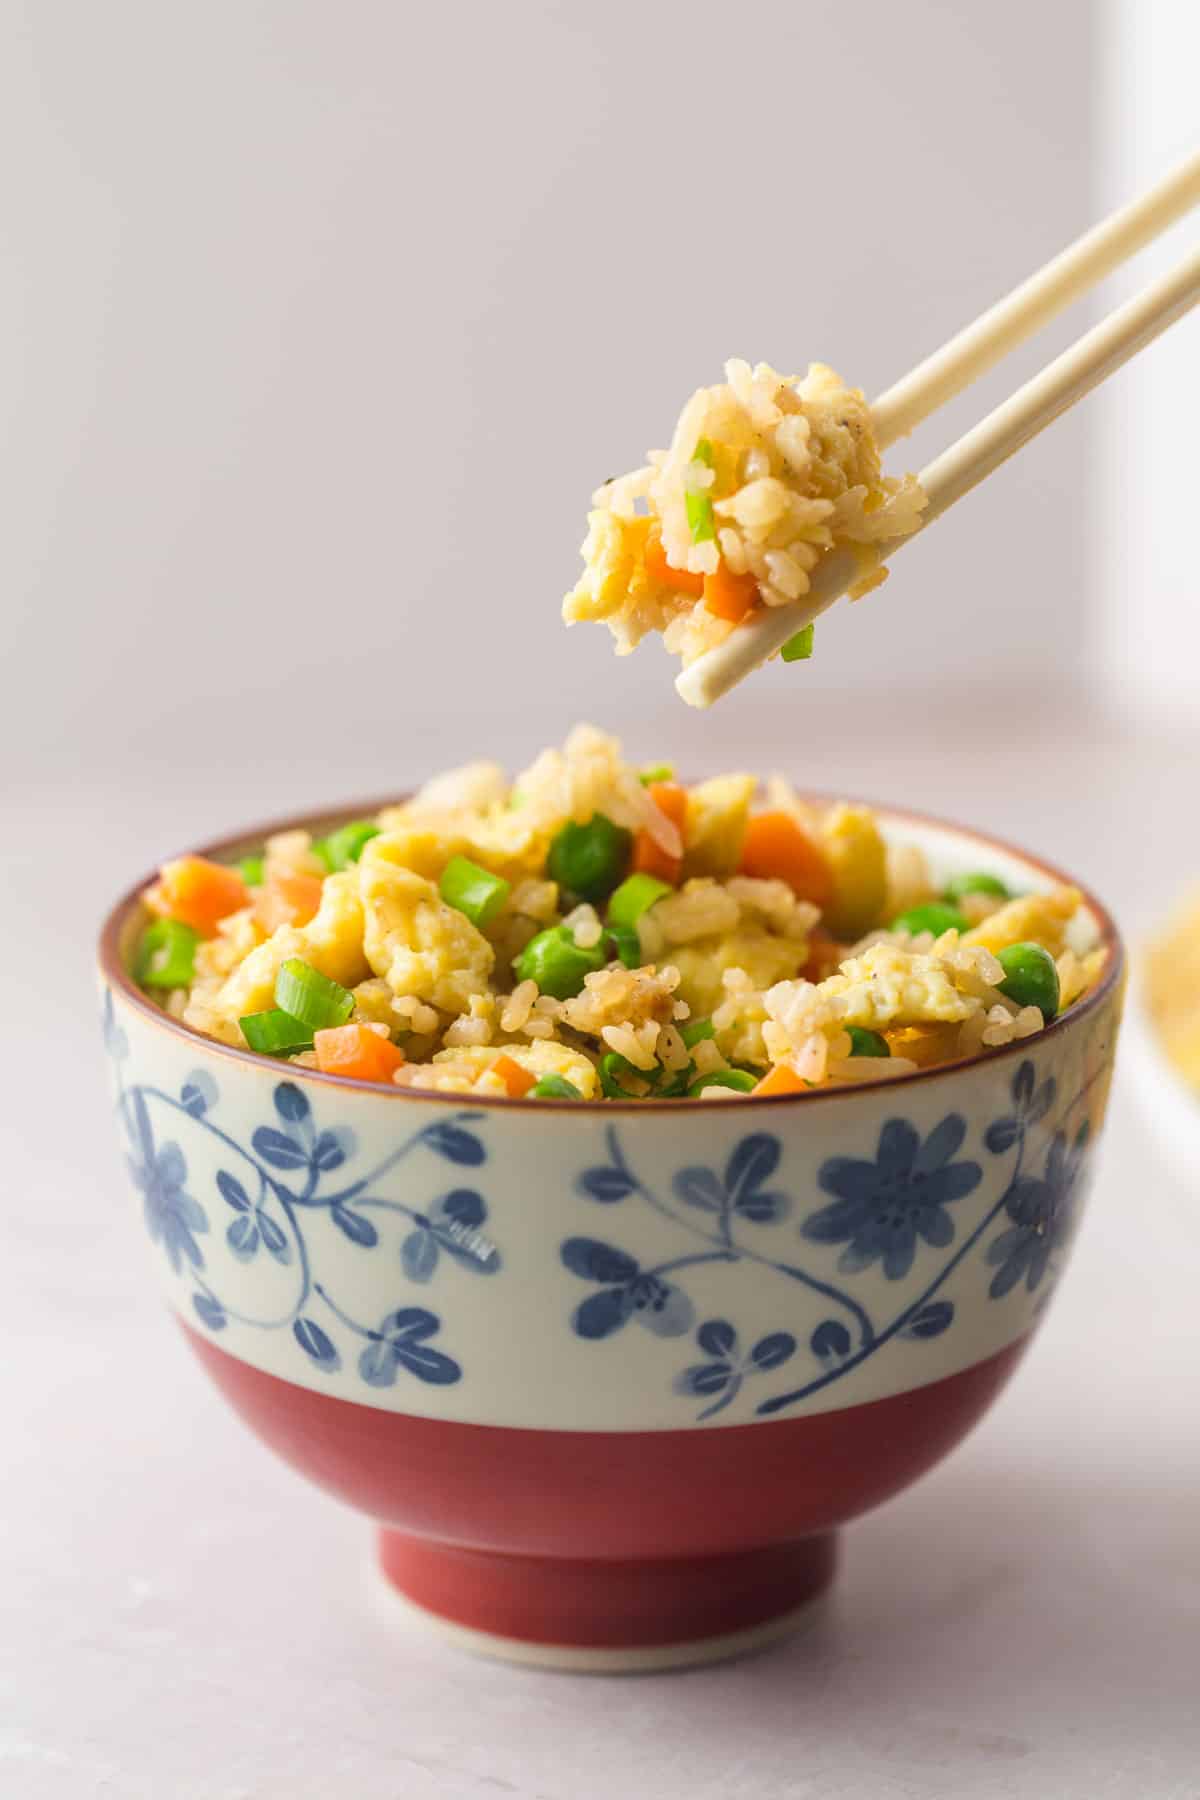 A Japanese traditional bowl with fried rice, and chop sticks